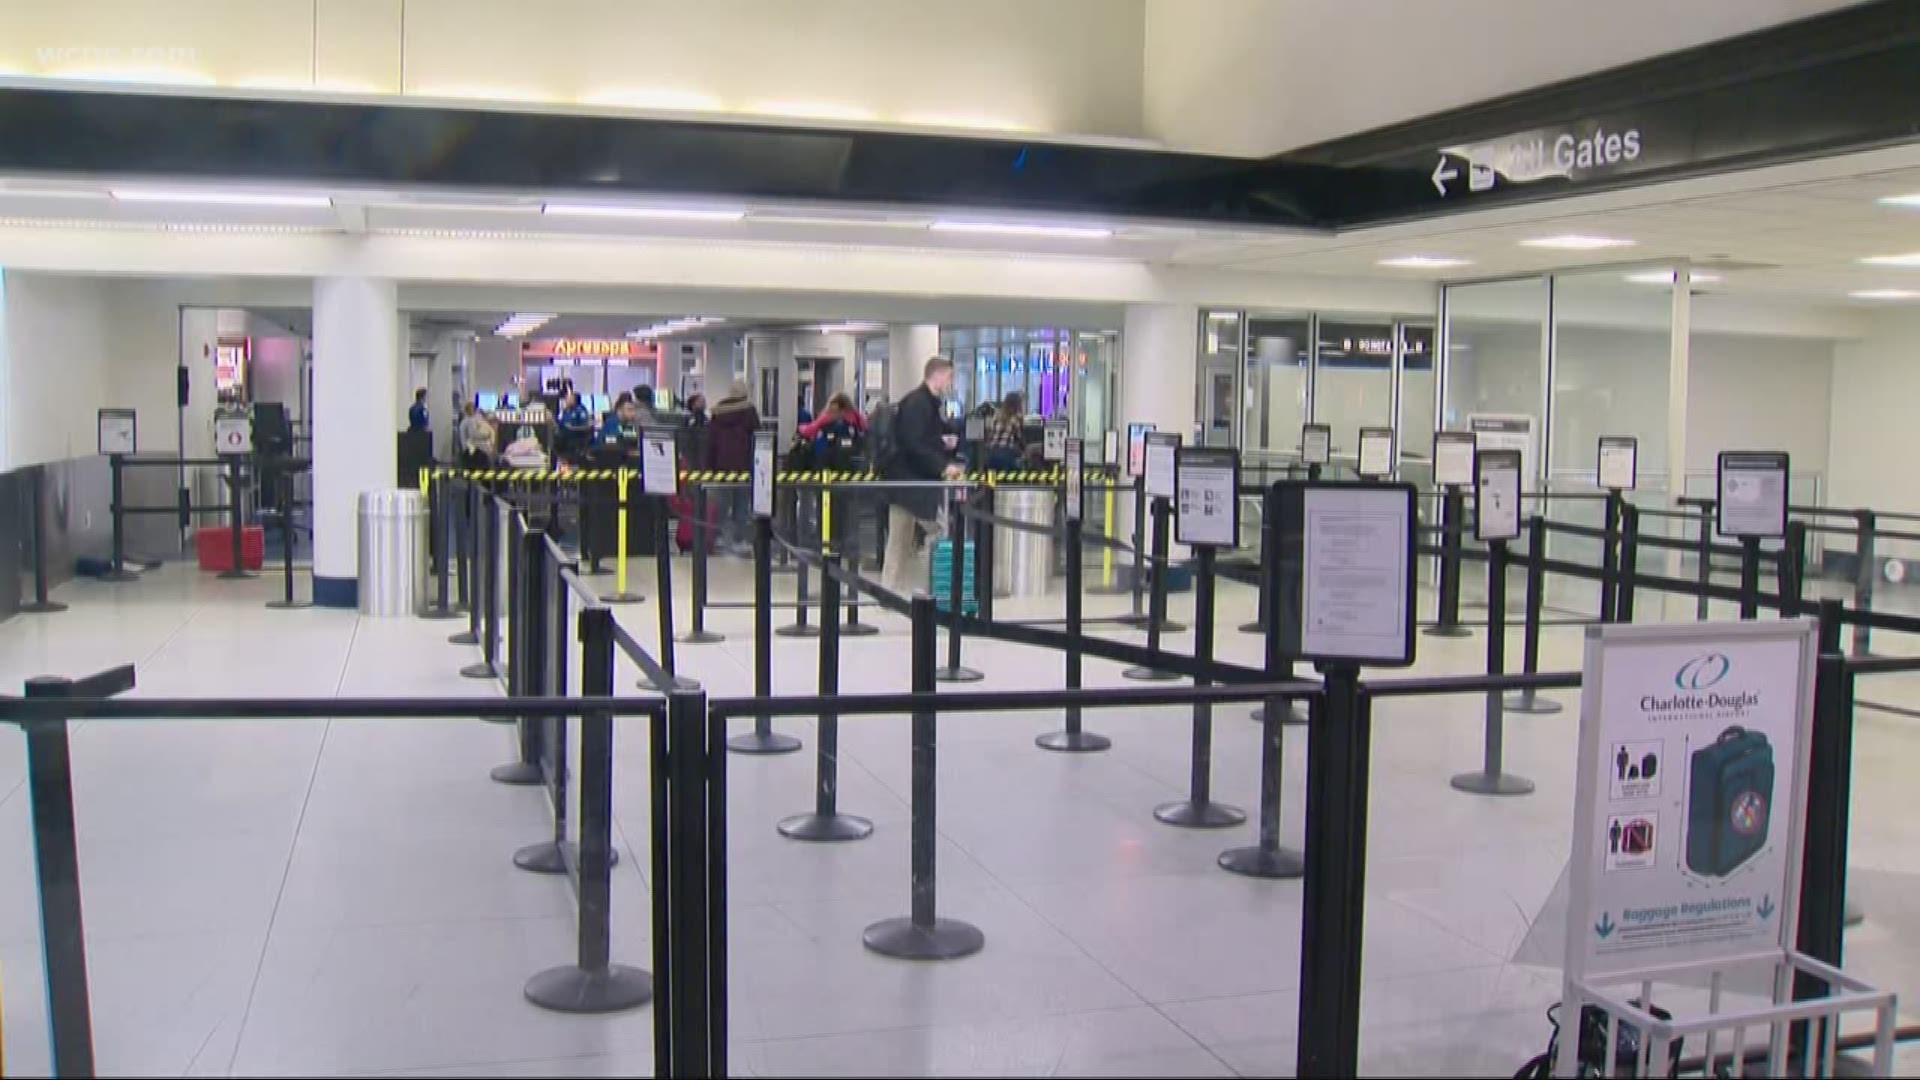 WCNC spoke to the wife of one TSA officer who says her husband will keep showing up as long as this shutdown lasts.